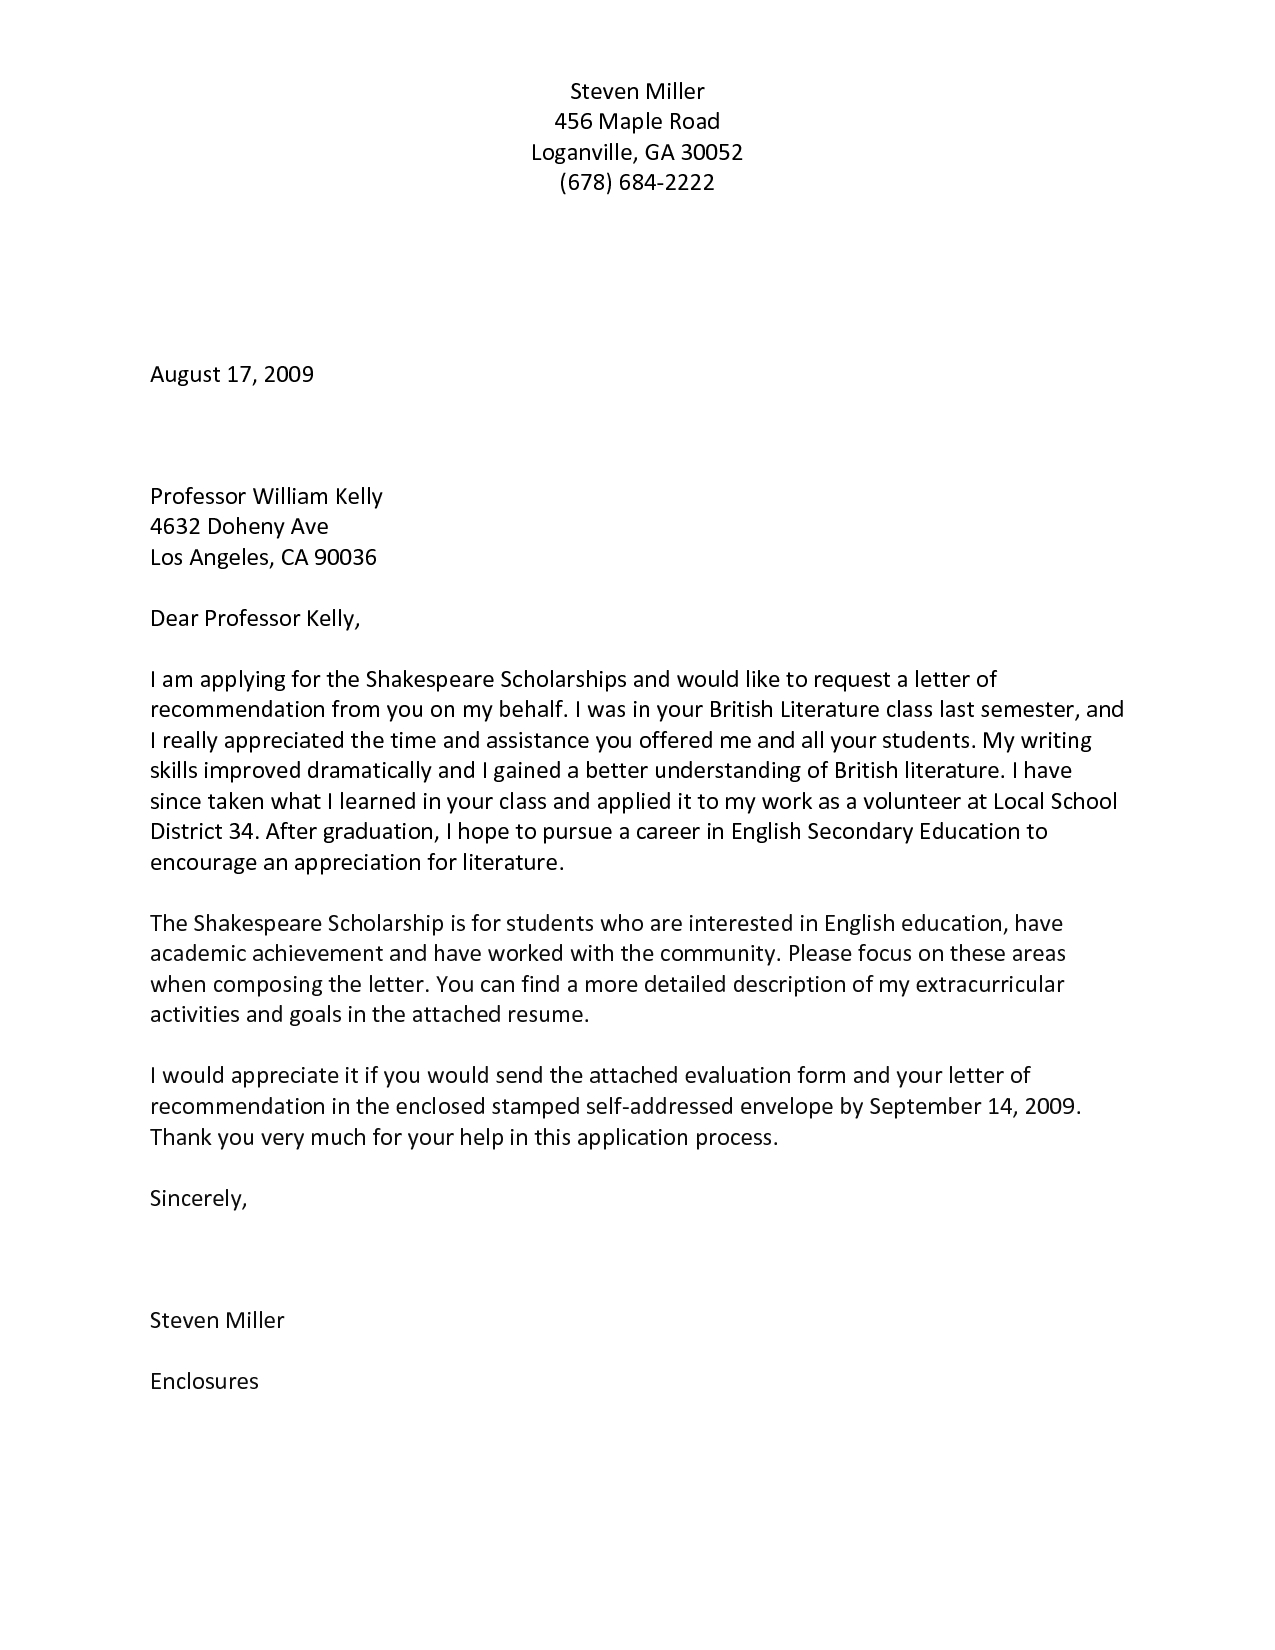 letter of recommendation request template Collection-academic reference request template 19-f